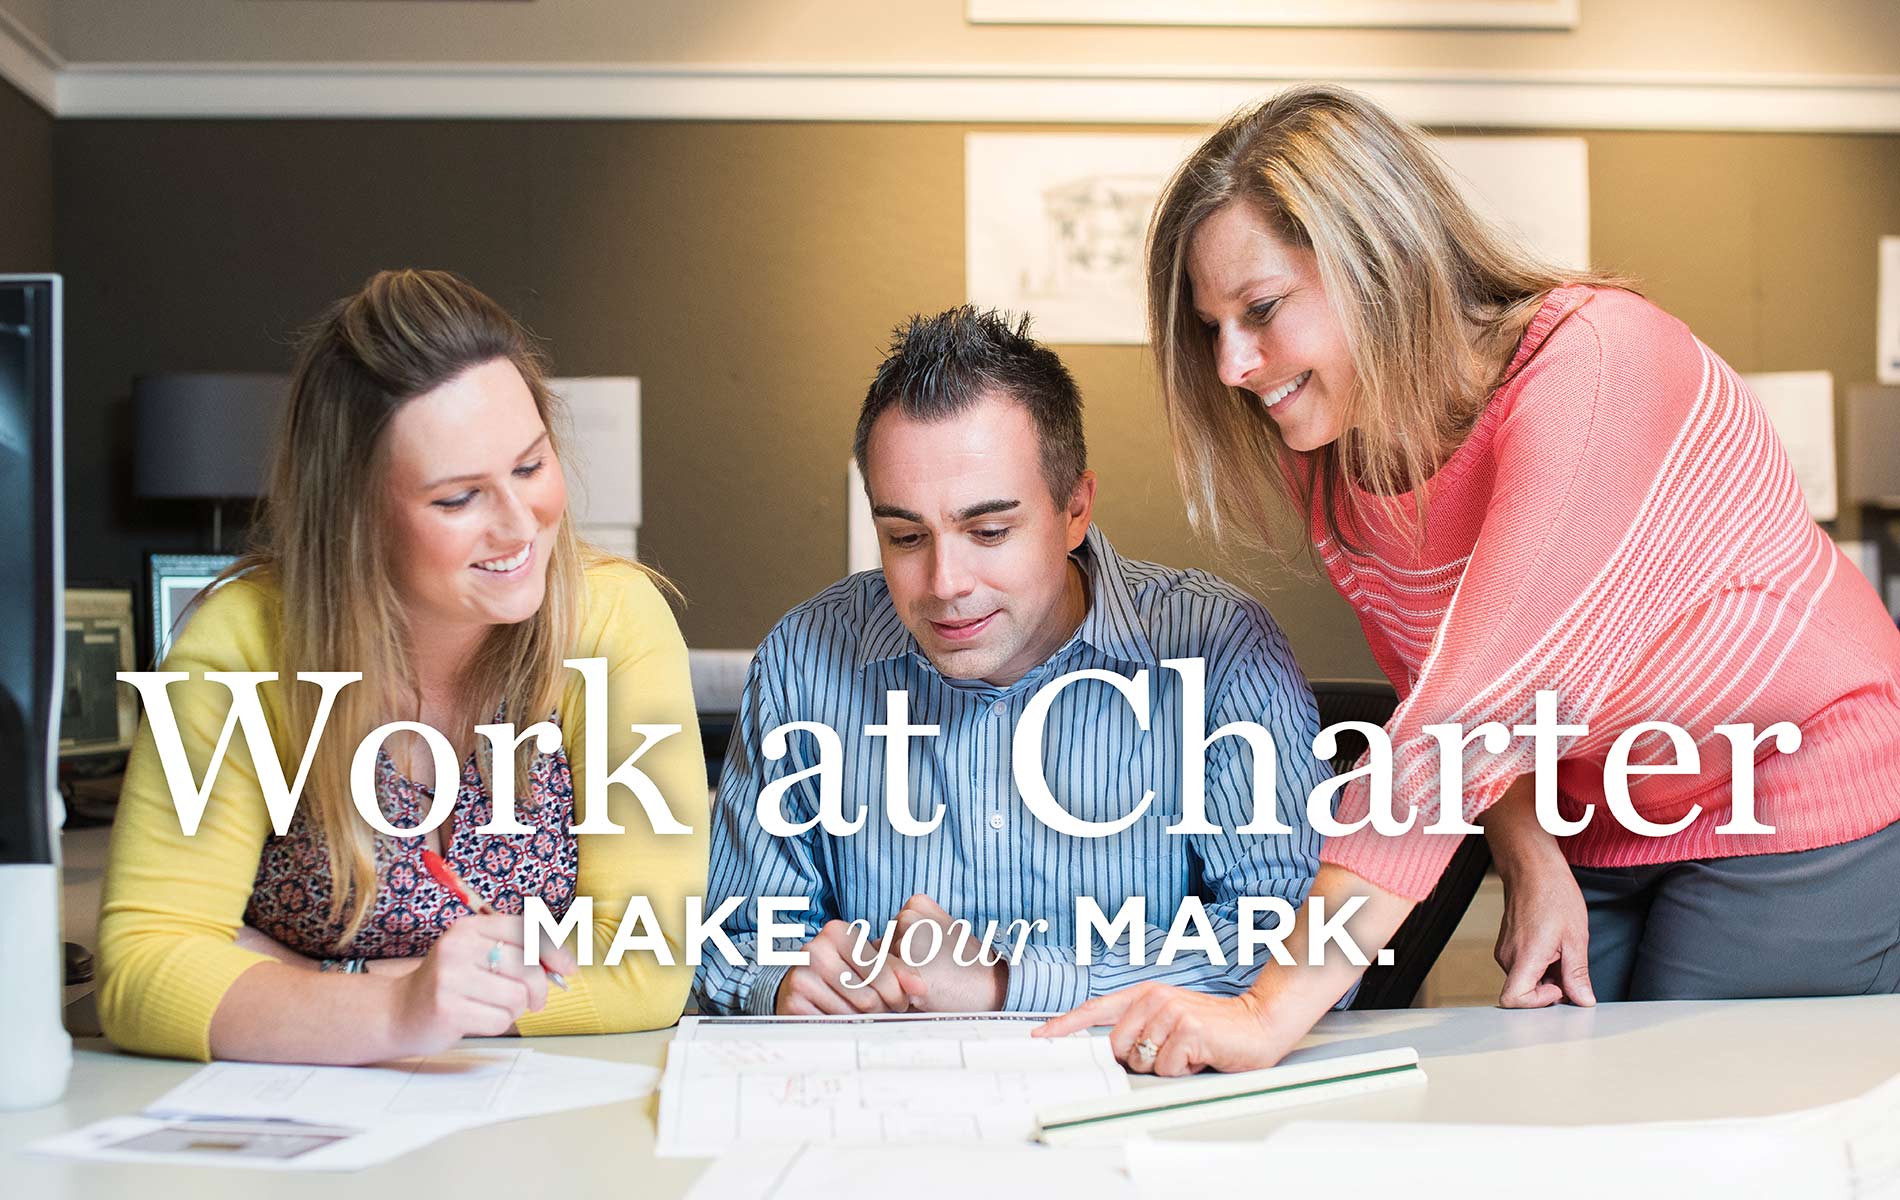 Work at Charter - Make Your Mark